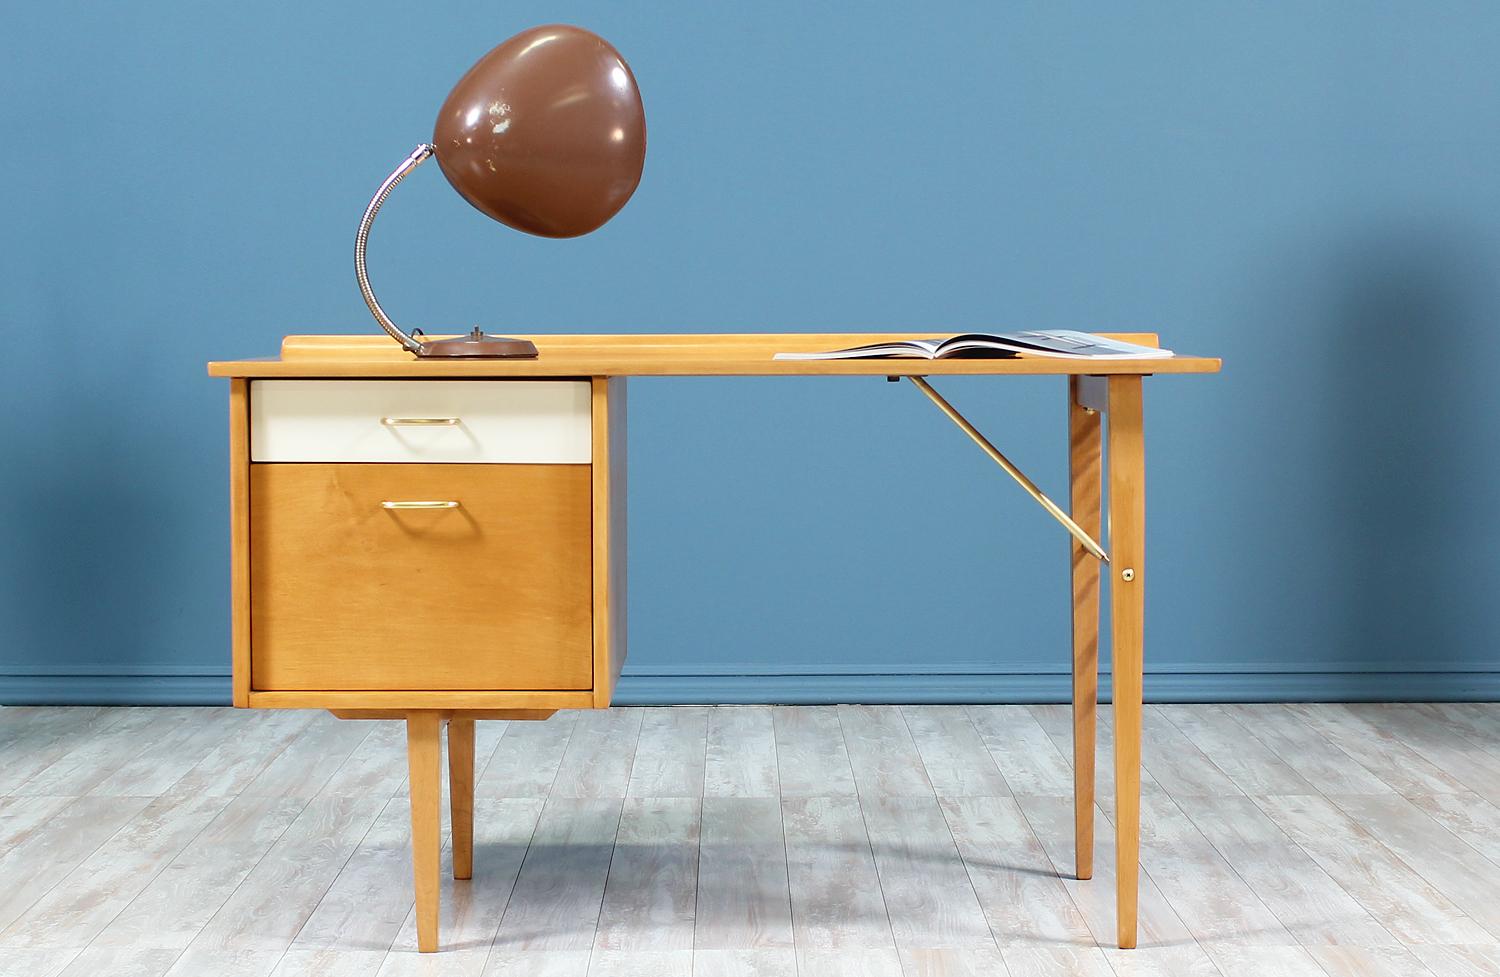 Gorgeous writing desk designed by Milo Baughman for Murray Furniture in the United States circa 1950’s. This lovely compact desk features a birch wood construction with brass hardware, which include the drawer pulls and the support rods underneath